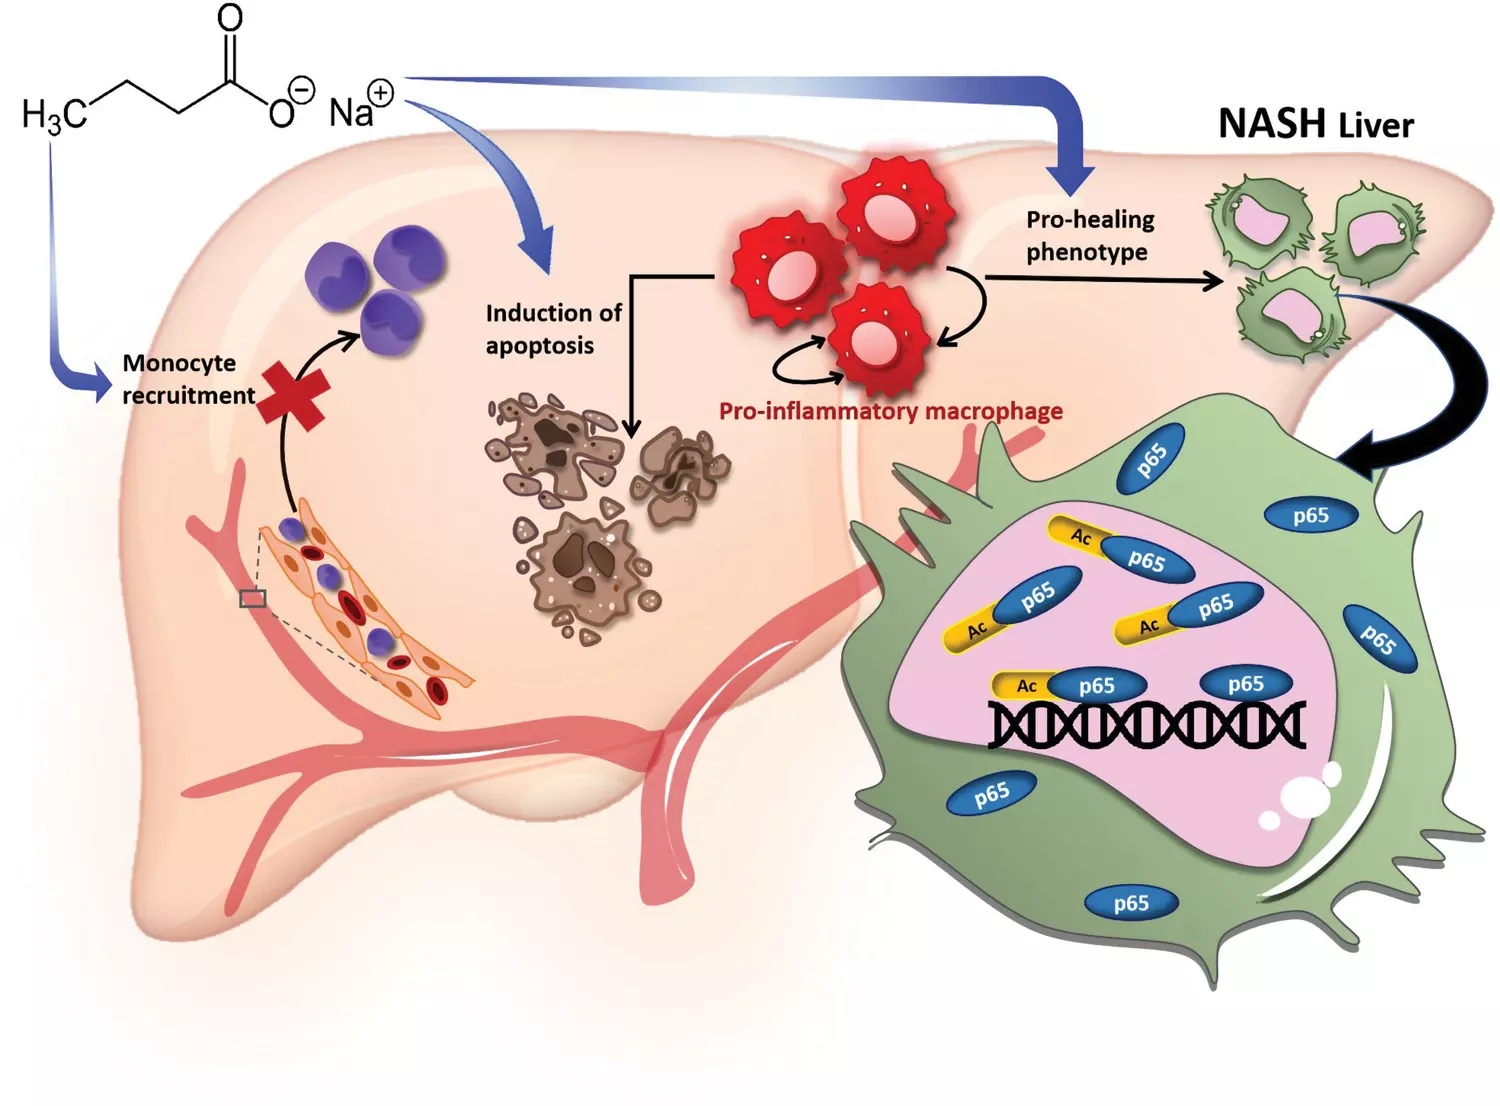 Schematic of the mechanism of NaBu (Sodium Butyrate) in improving non-alcoholic steatohepatitis (NASH). Image published under Creative Commons CC BY license